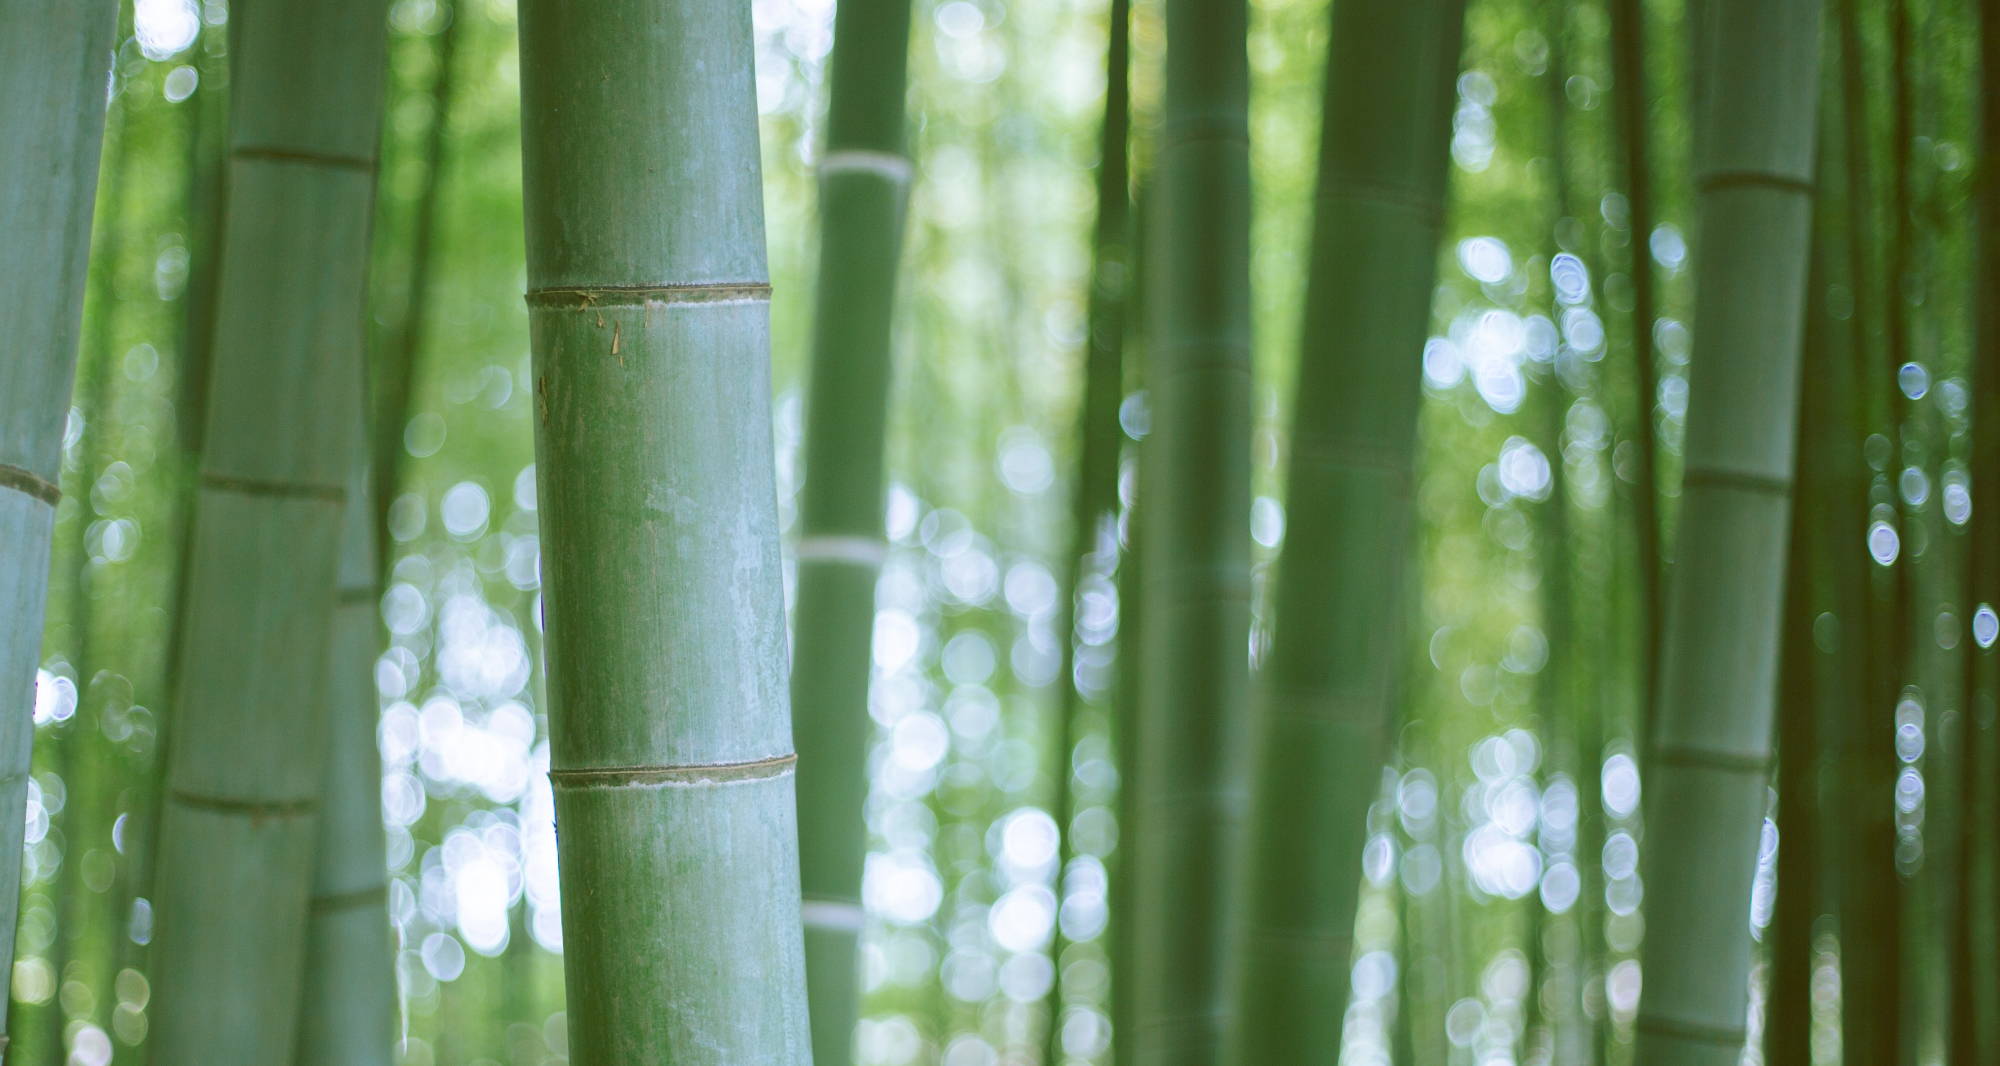 Several green bamboo poles are in focus, off-centered, with an entire bamboo forest blurred in the background.